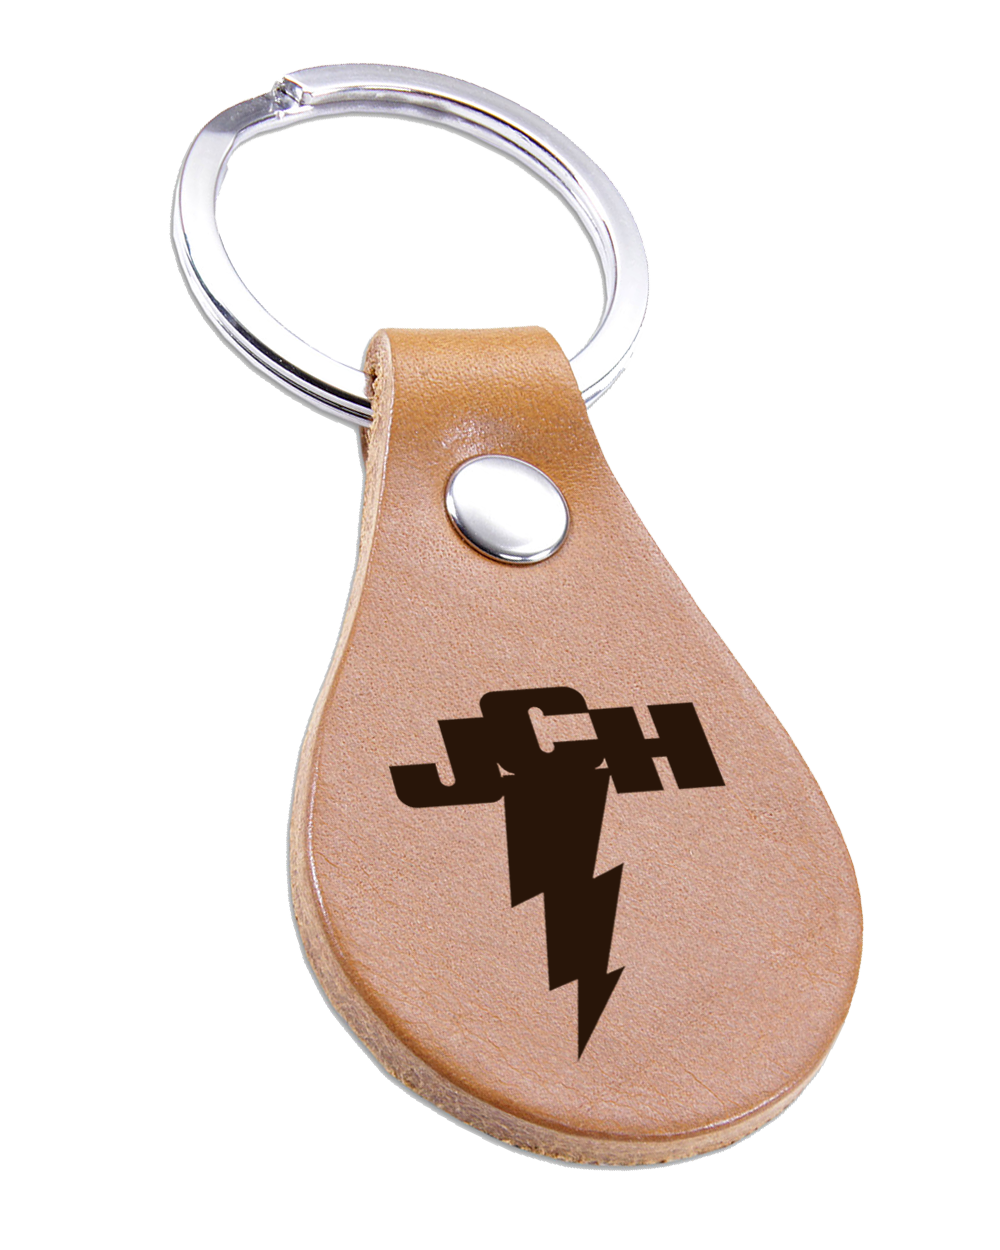 Leather Clip Keychain - Black – Cowboys and Astronauts